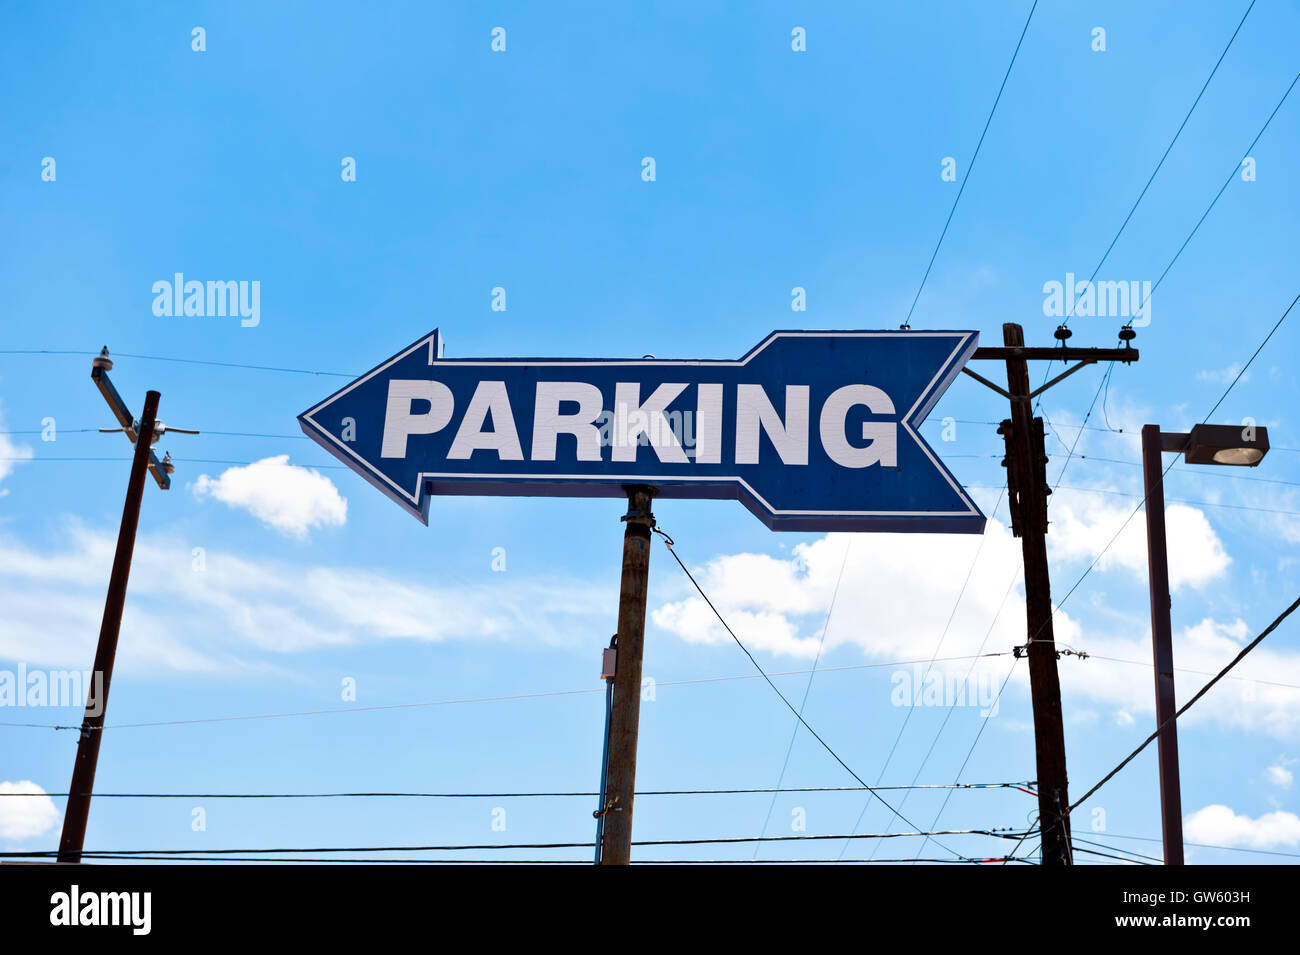 A sign pointing to public parking in downtown Tucson Arizona Stock Photo